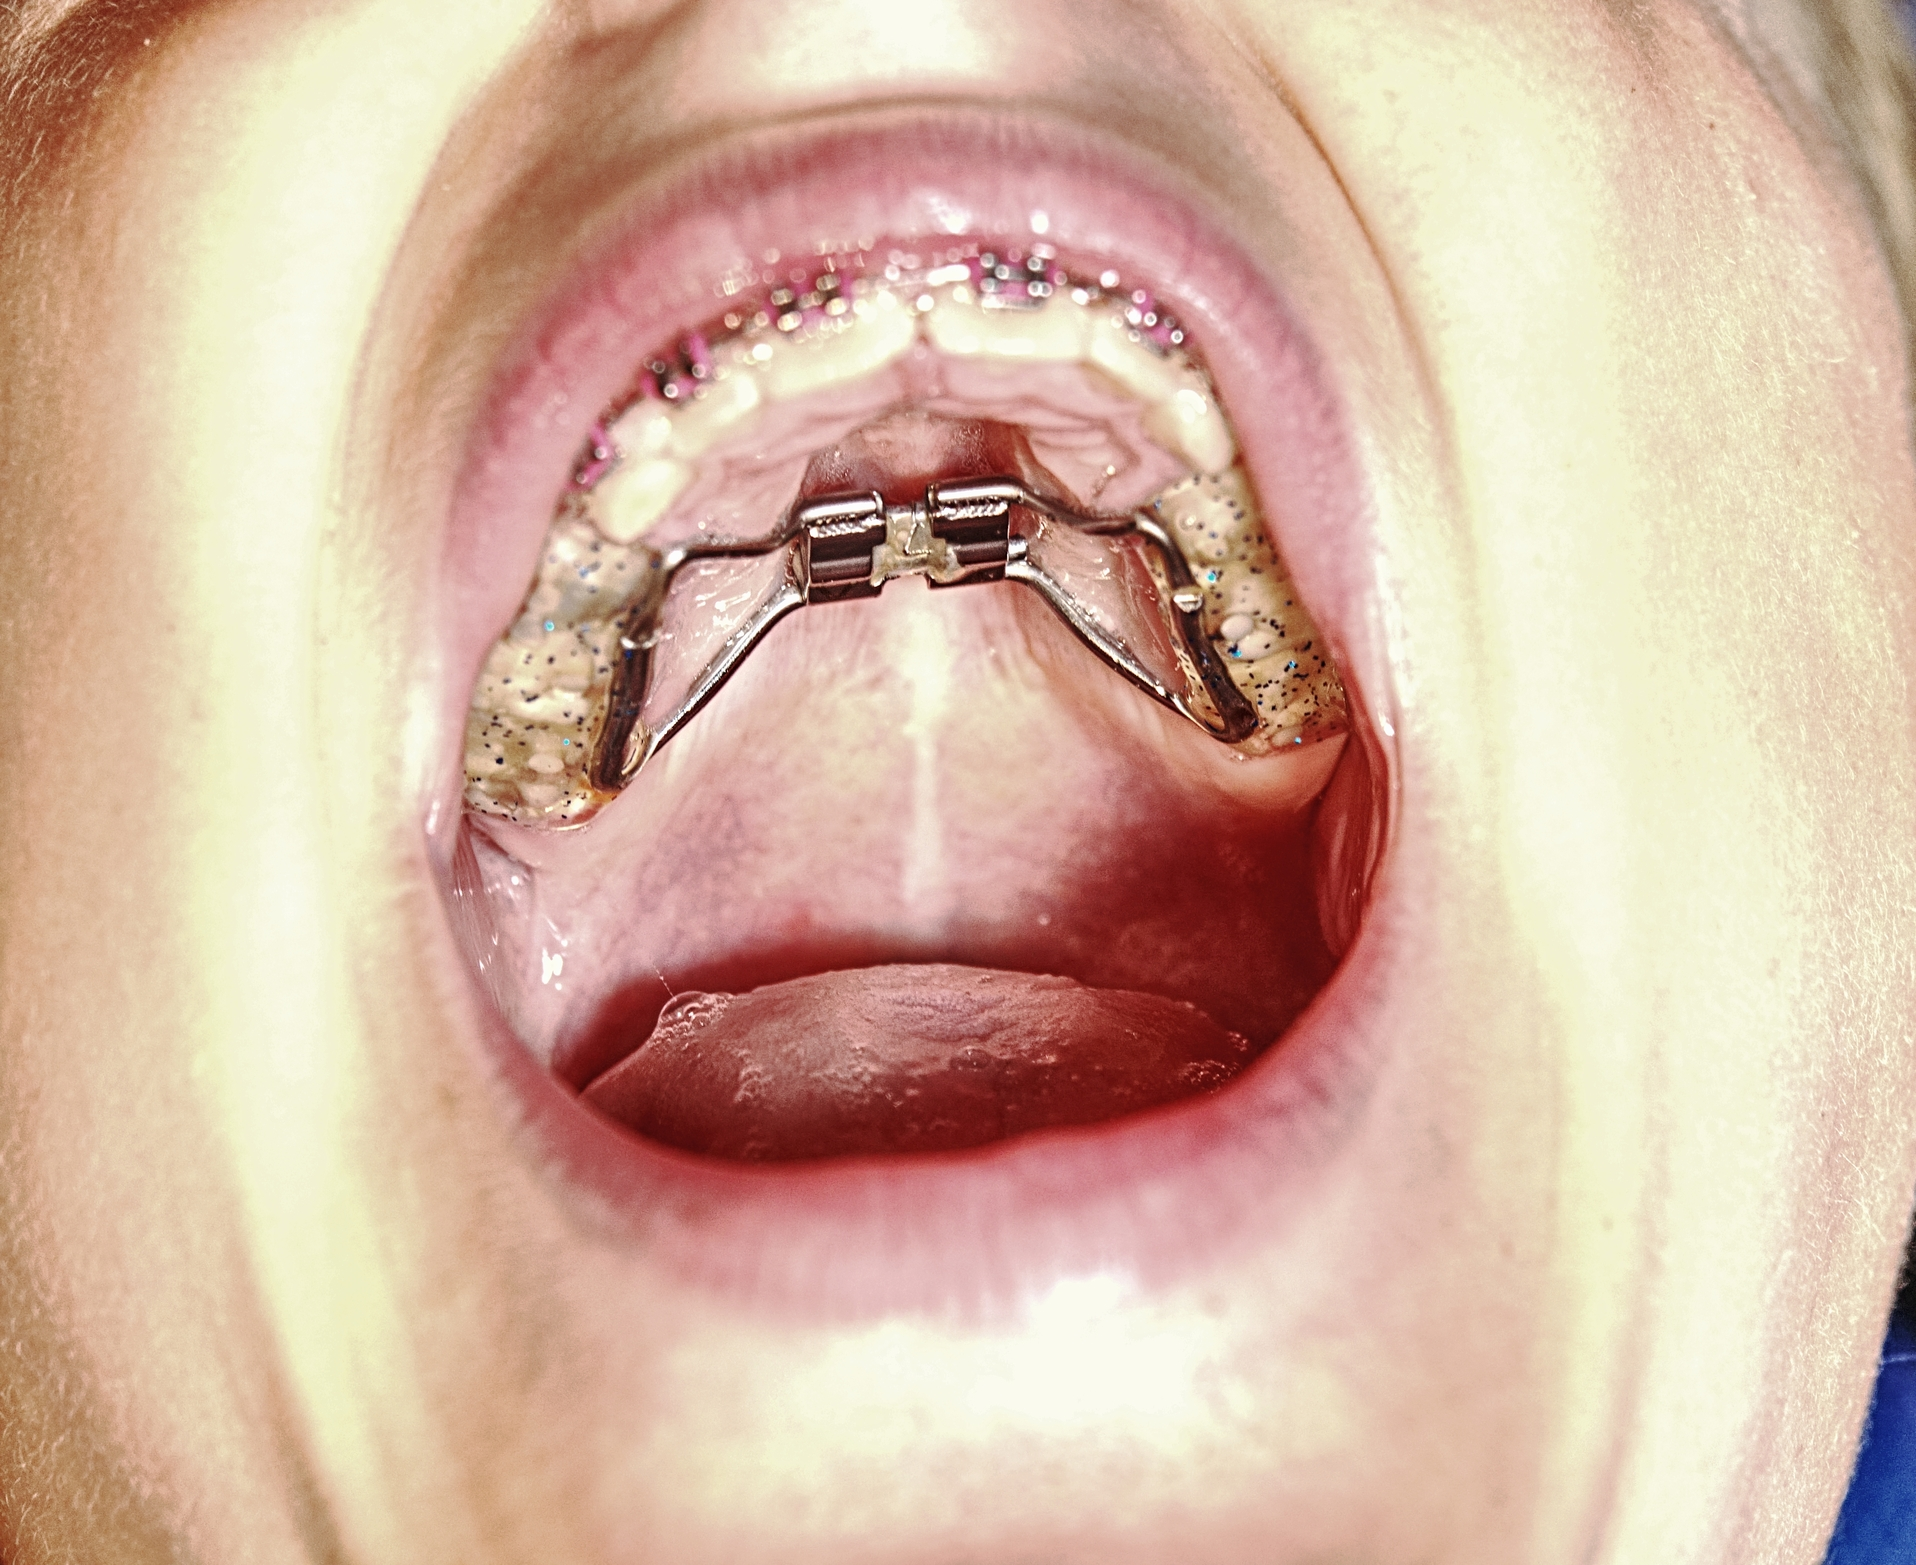 A photo of a mouth with a palatal expander glued to the upper jaw via the teeth